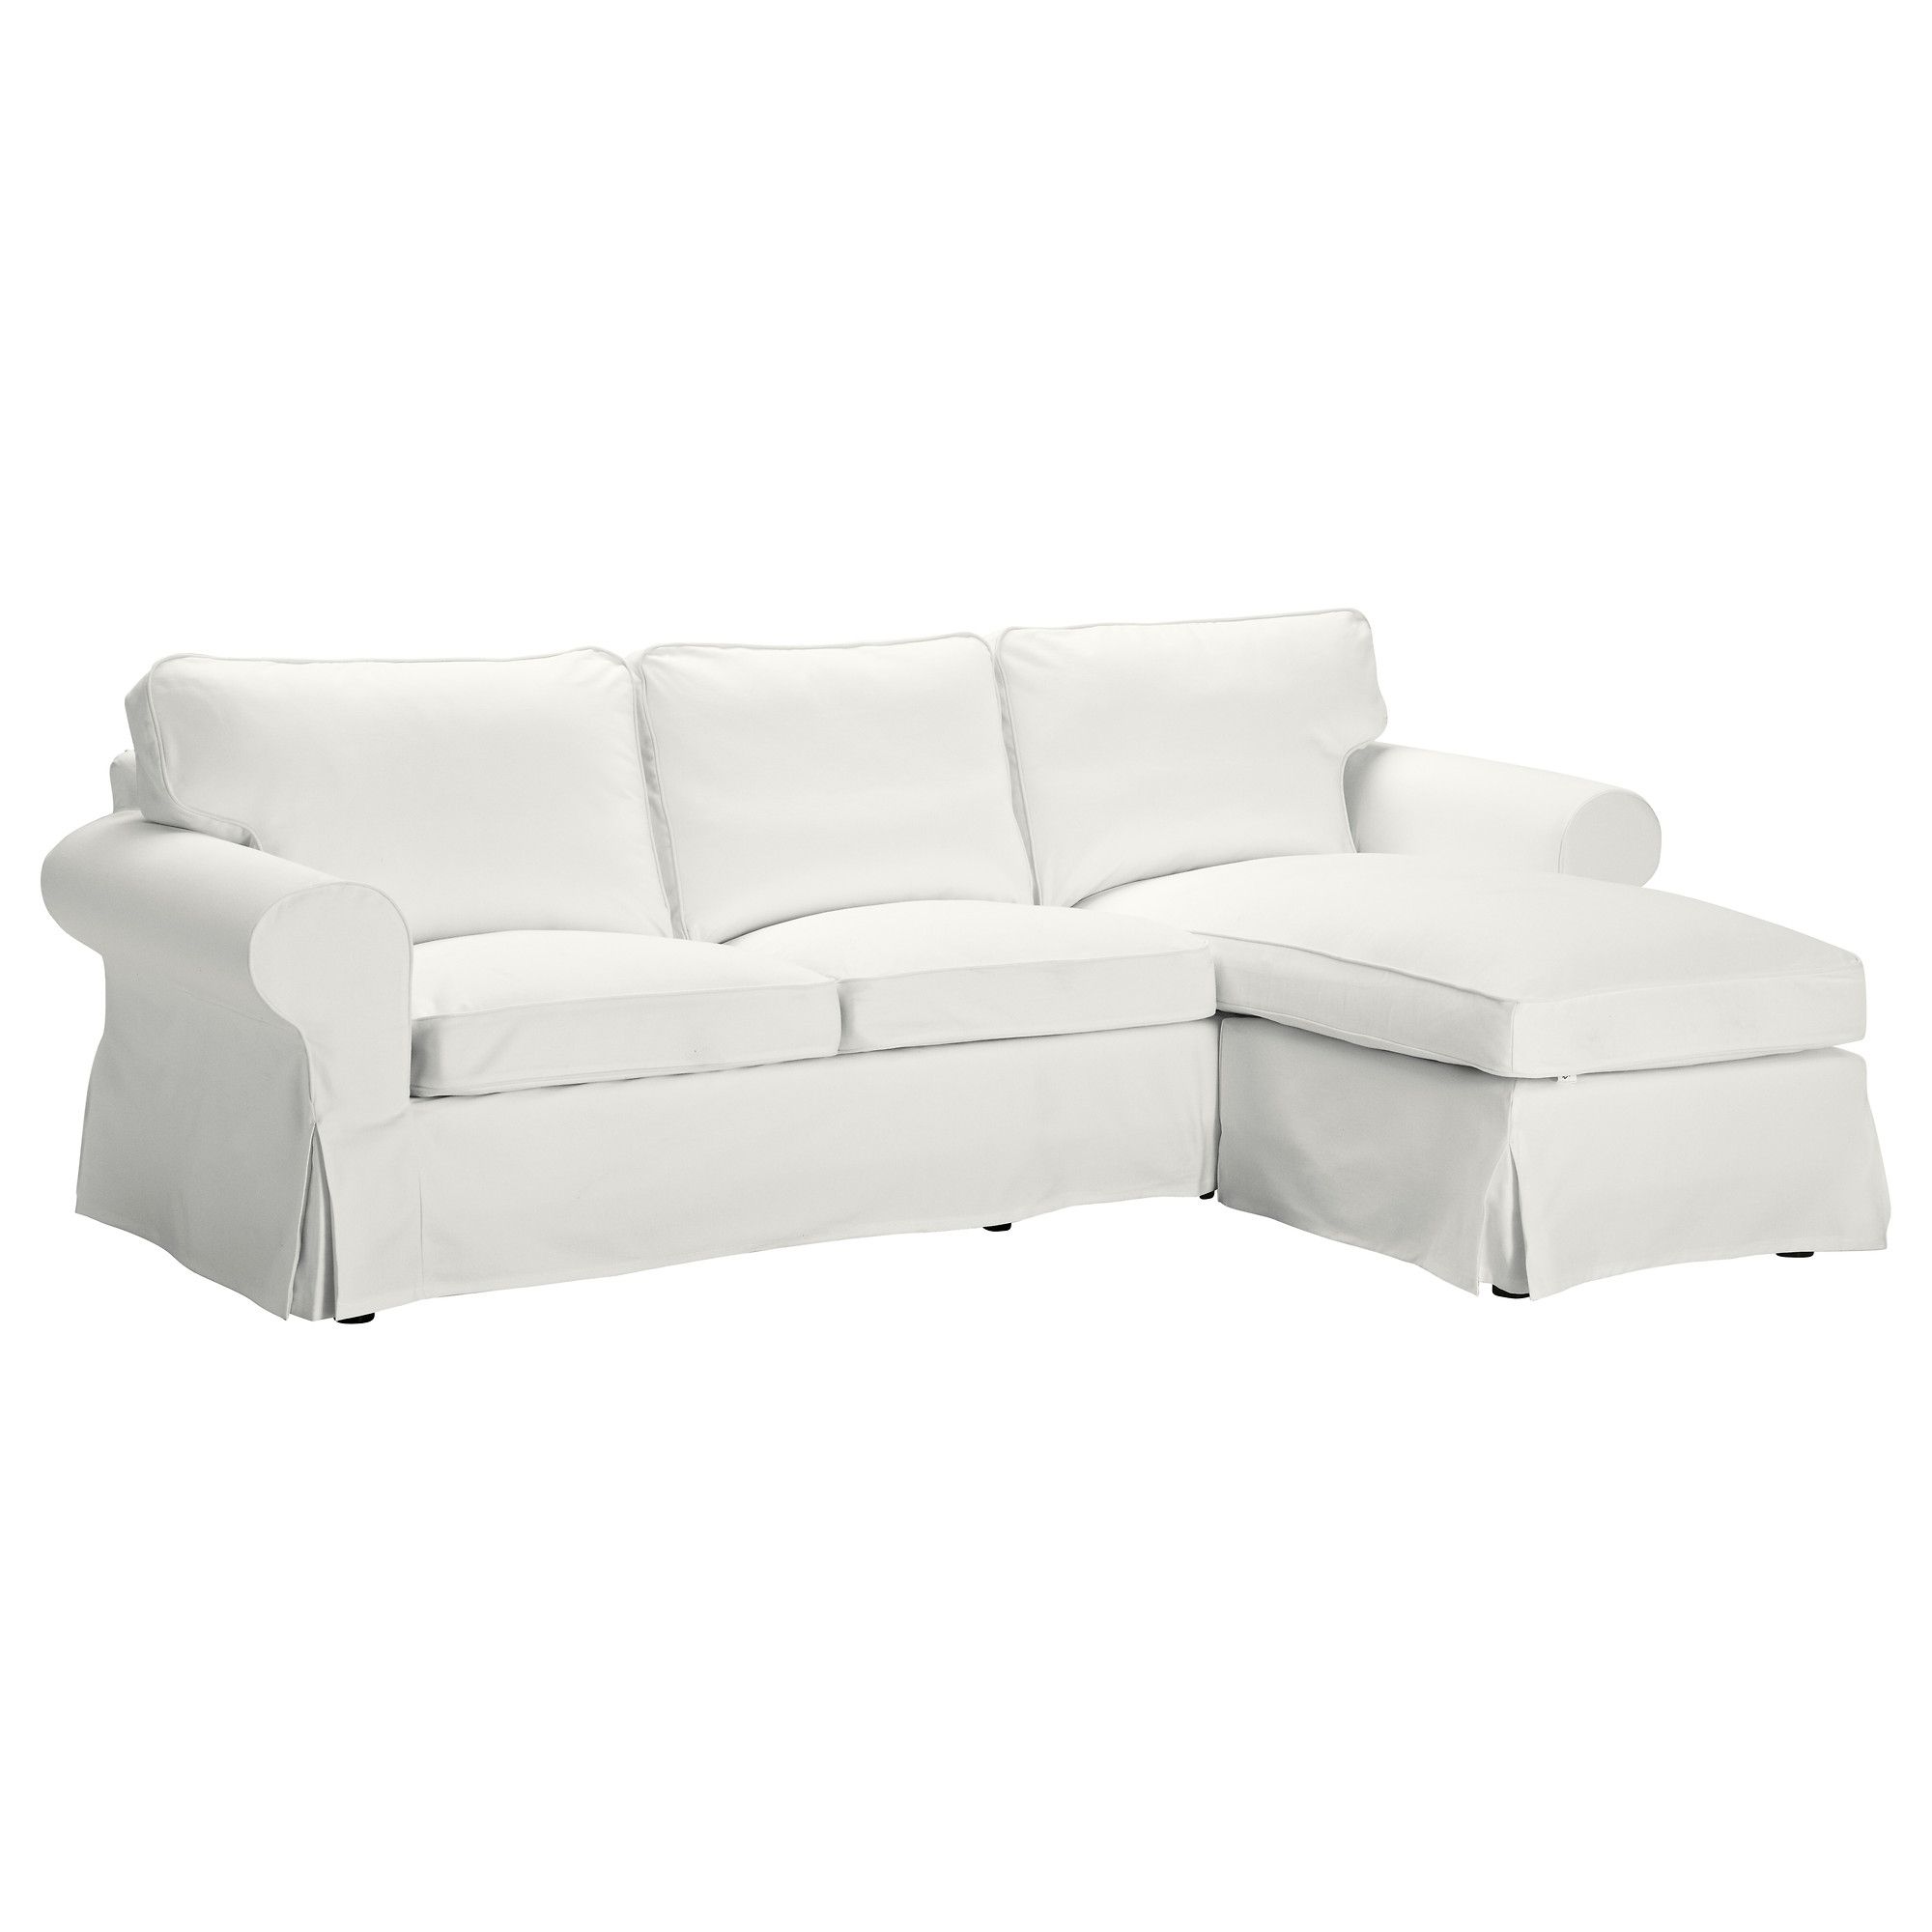 Ektorp Cover For 3 Seat Sofa With Chaise Longue/blekinge White – Ikea In Current Ikea Chaise Sofas (View 13 of 15)